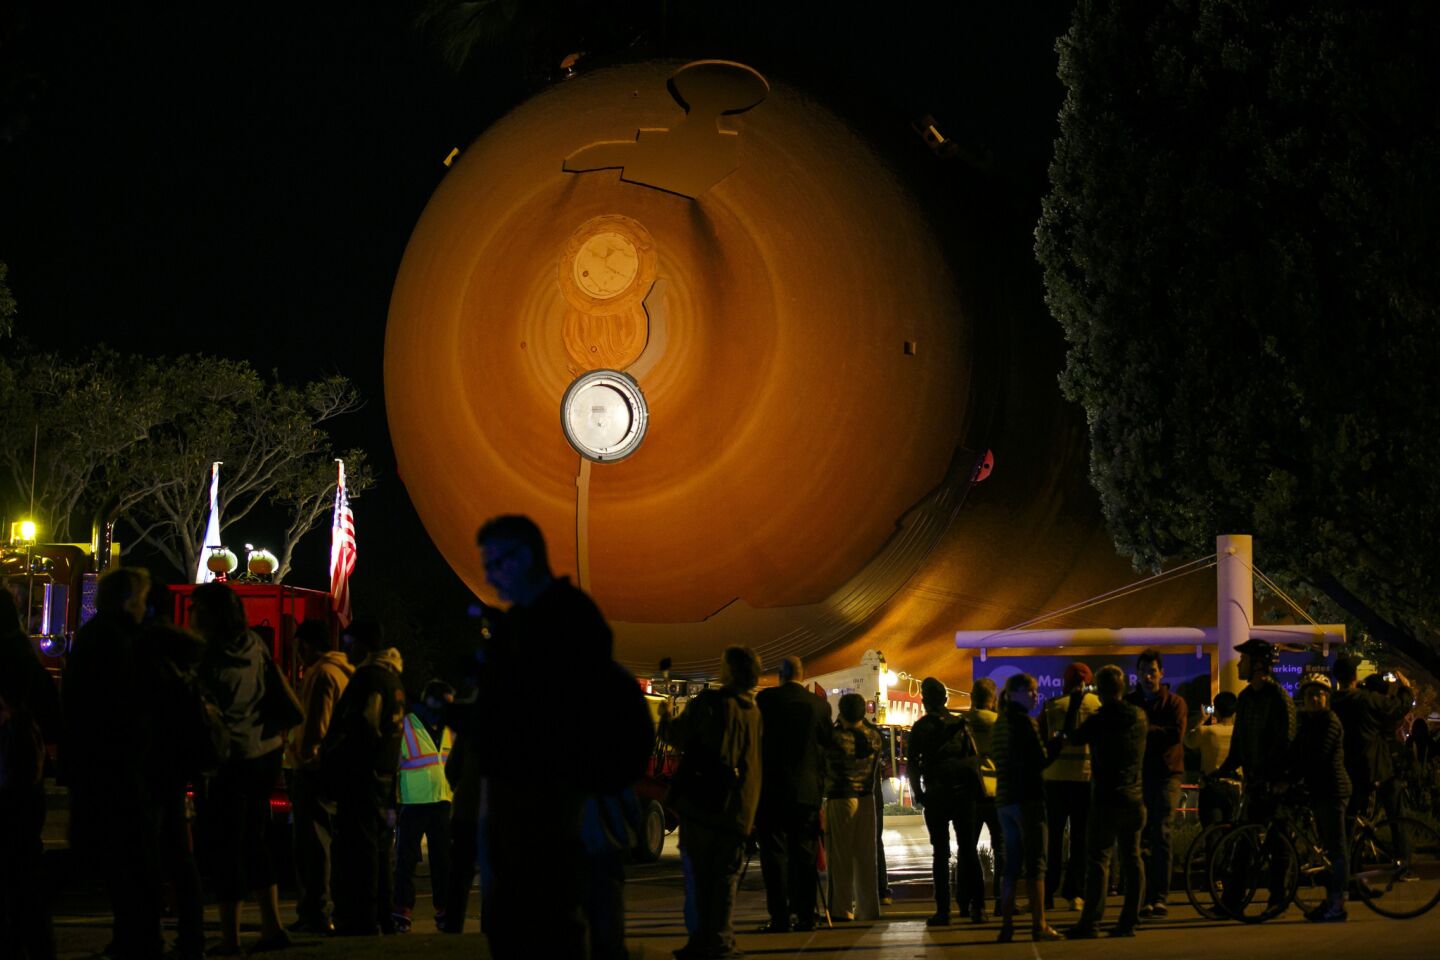 A crowd forms at Marina Del Rey to see ET-94 as it begins its journey to Exposition Park.